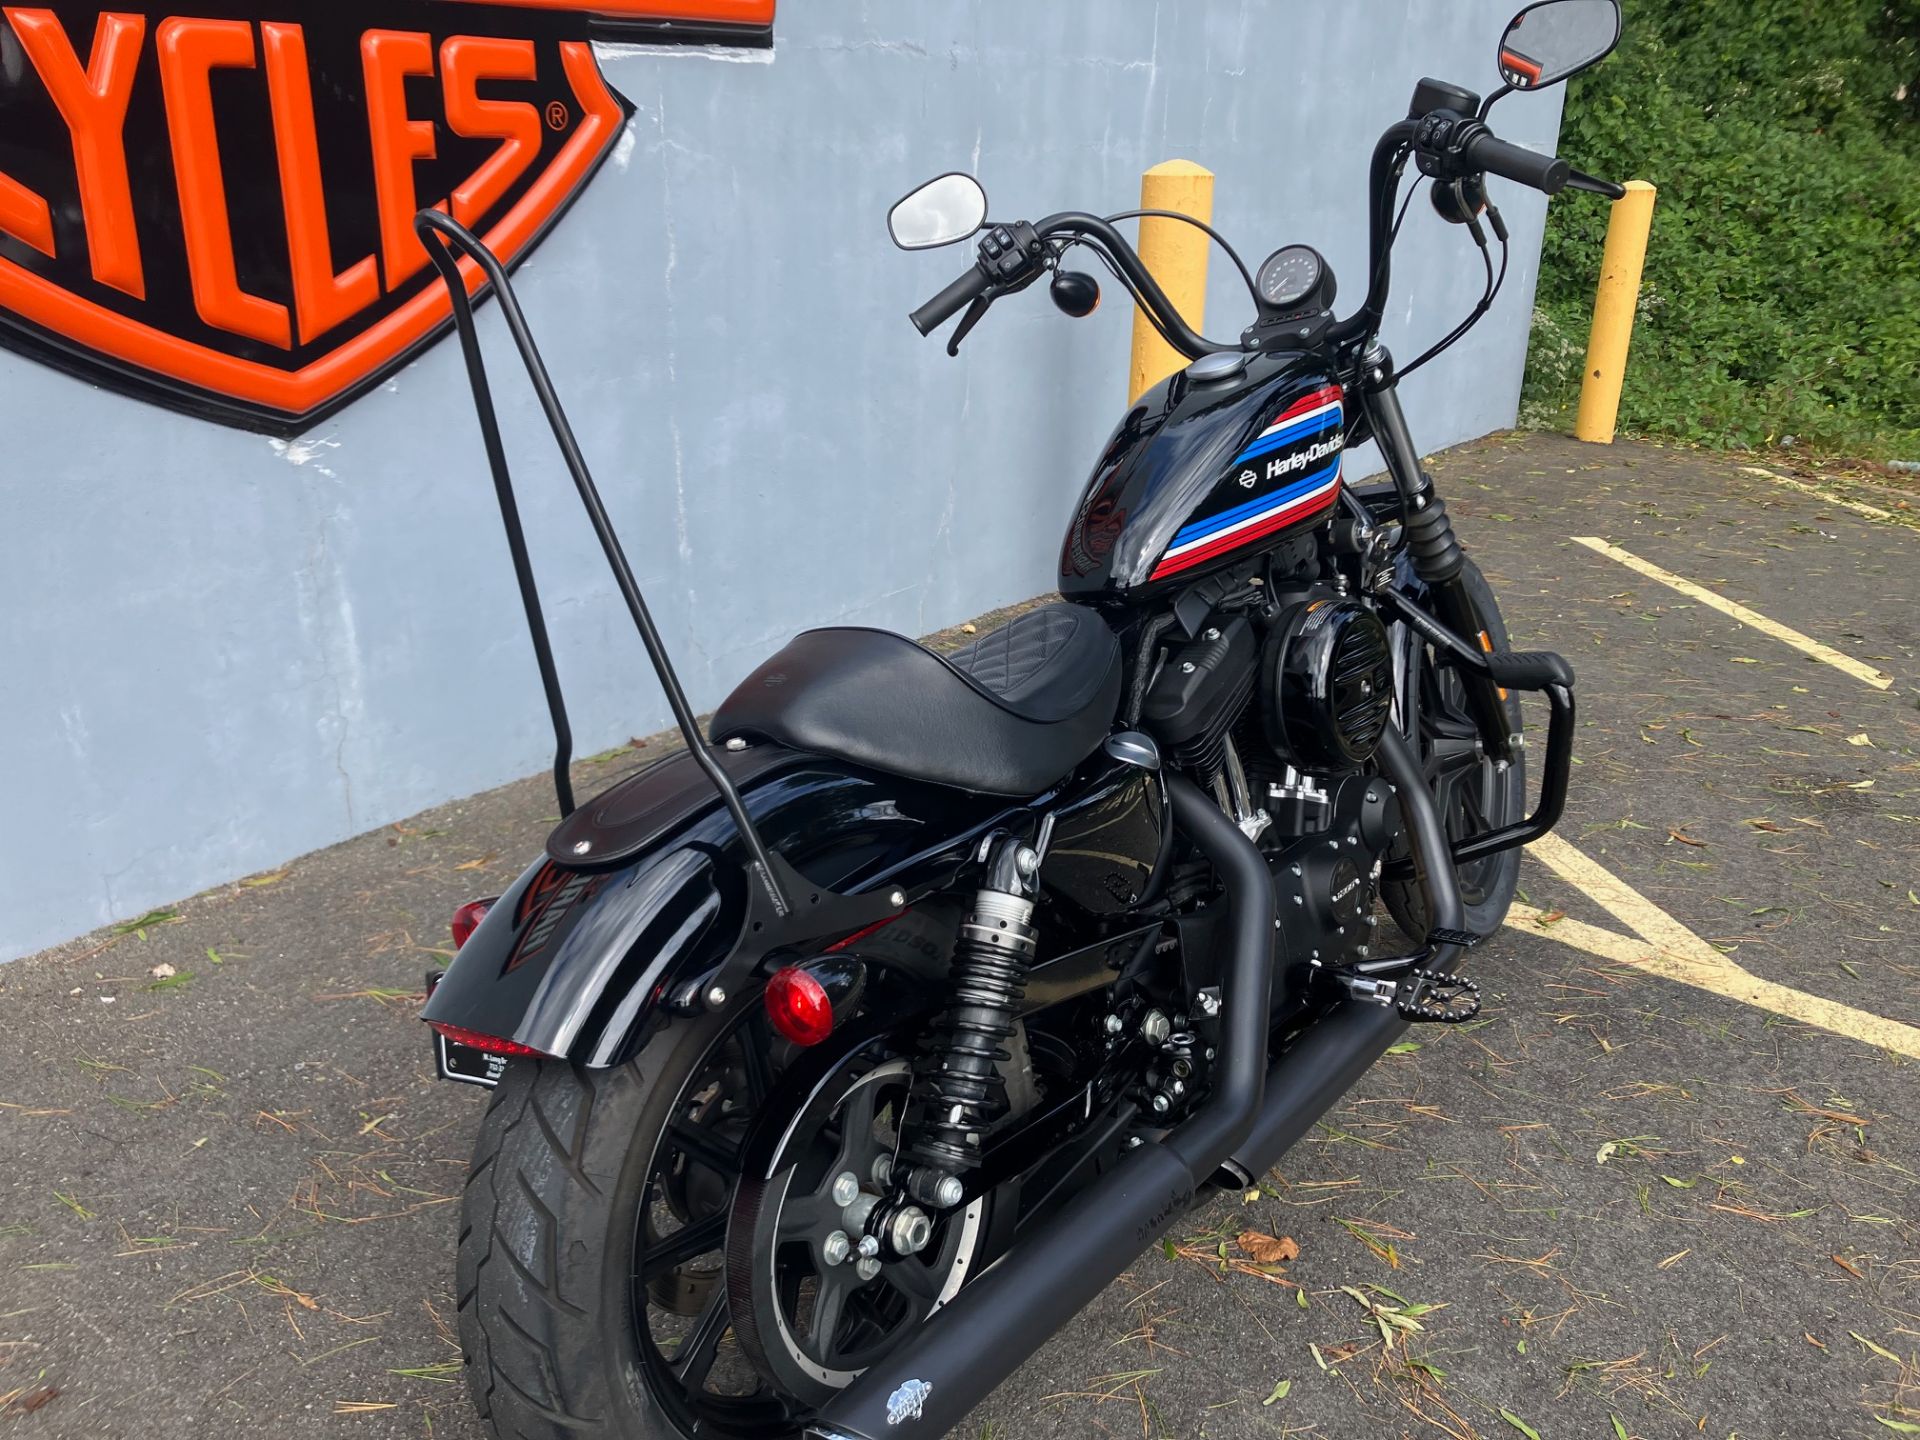 2020 Harley-Davidson IRON 1200 in West Long Branch, New Jersey - Photo 3